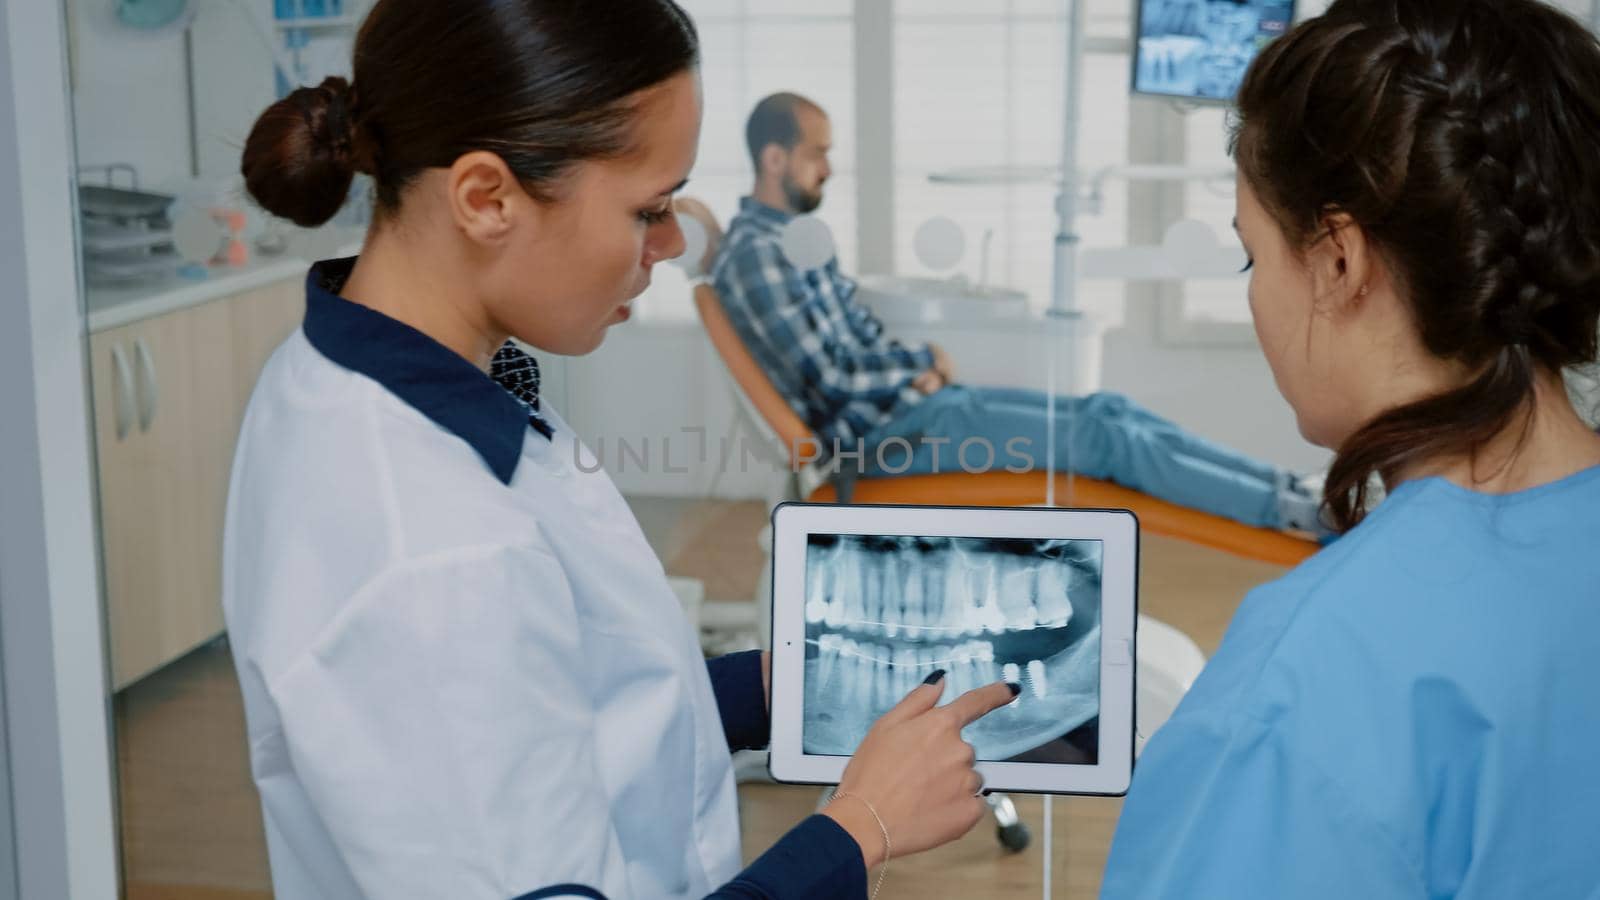 Stomatologist holding modern tablet with x ray on screen examining oral care and hygiene. Nurse and dentist looking at radiography discussing teeth diagnosis for patient sitting in cabinet